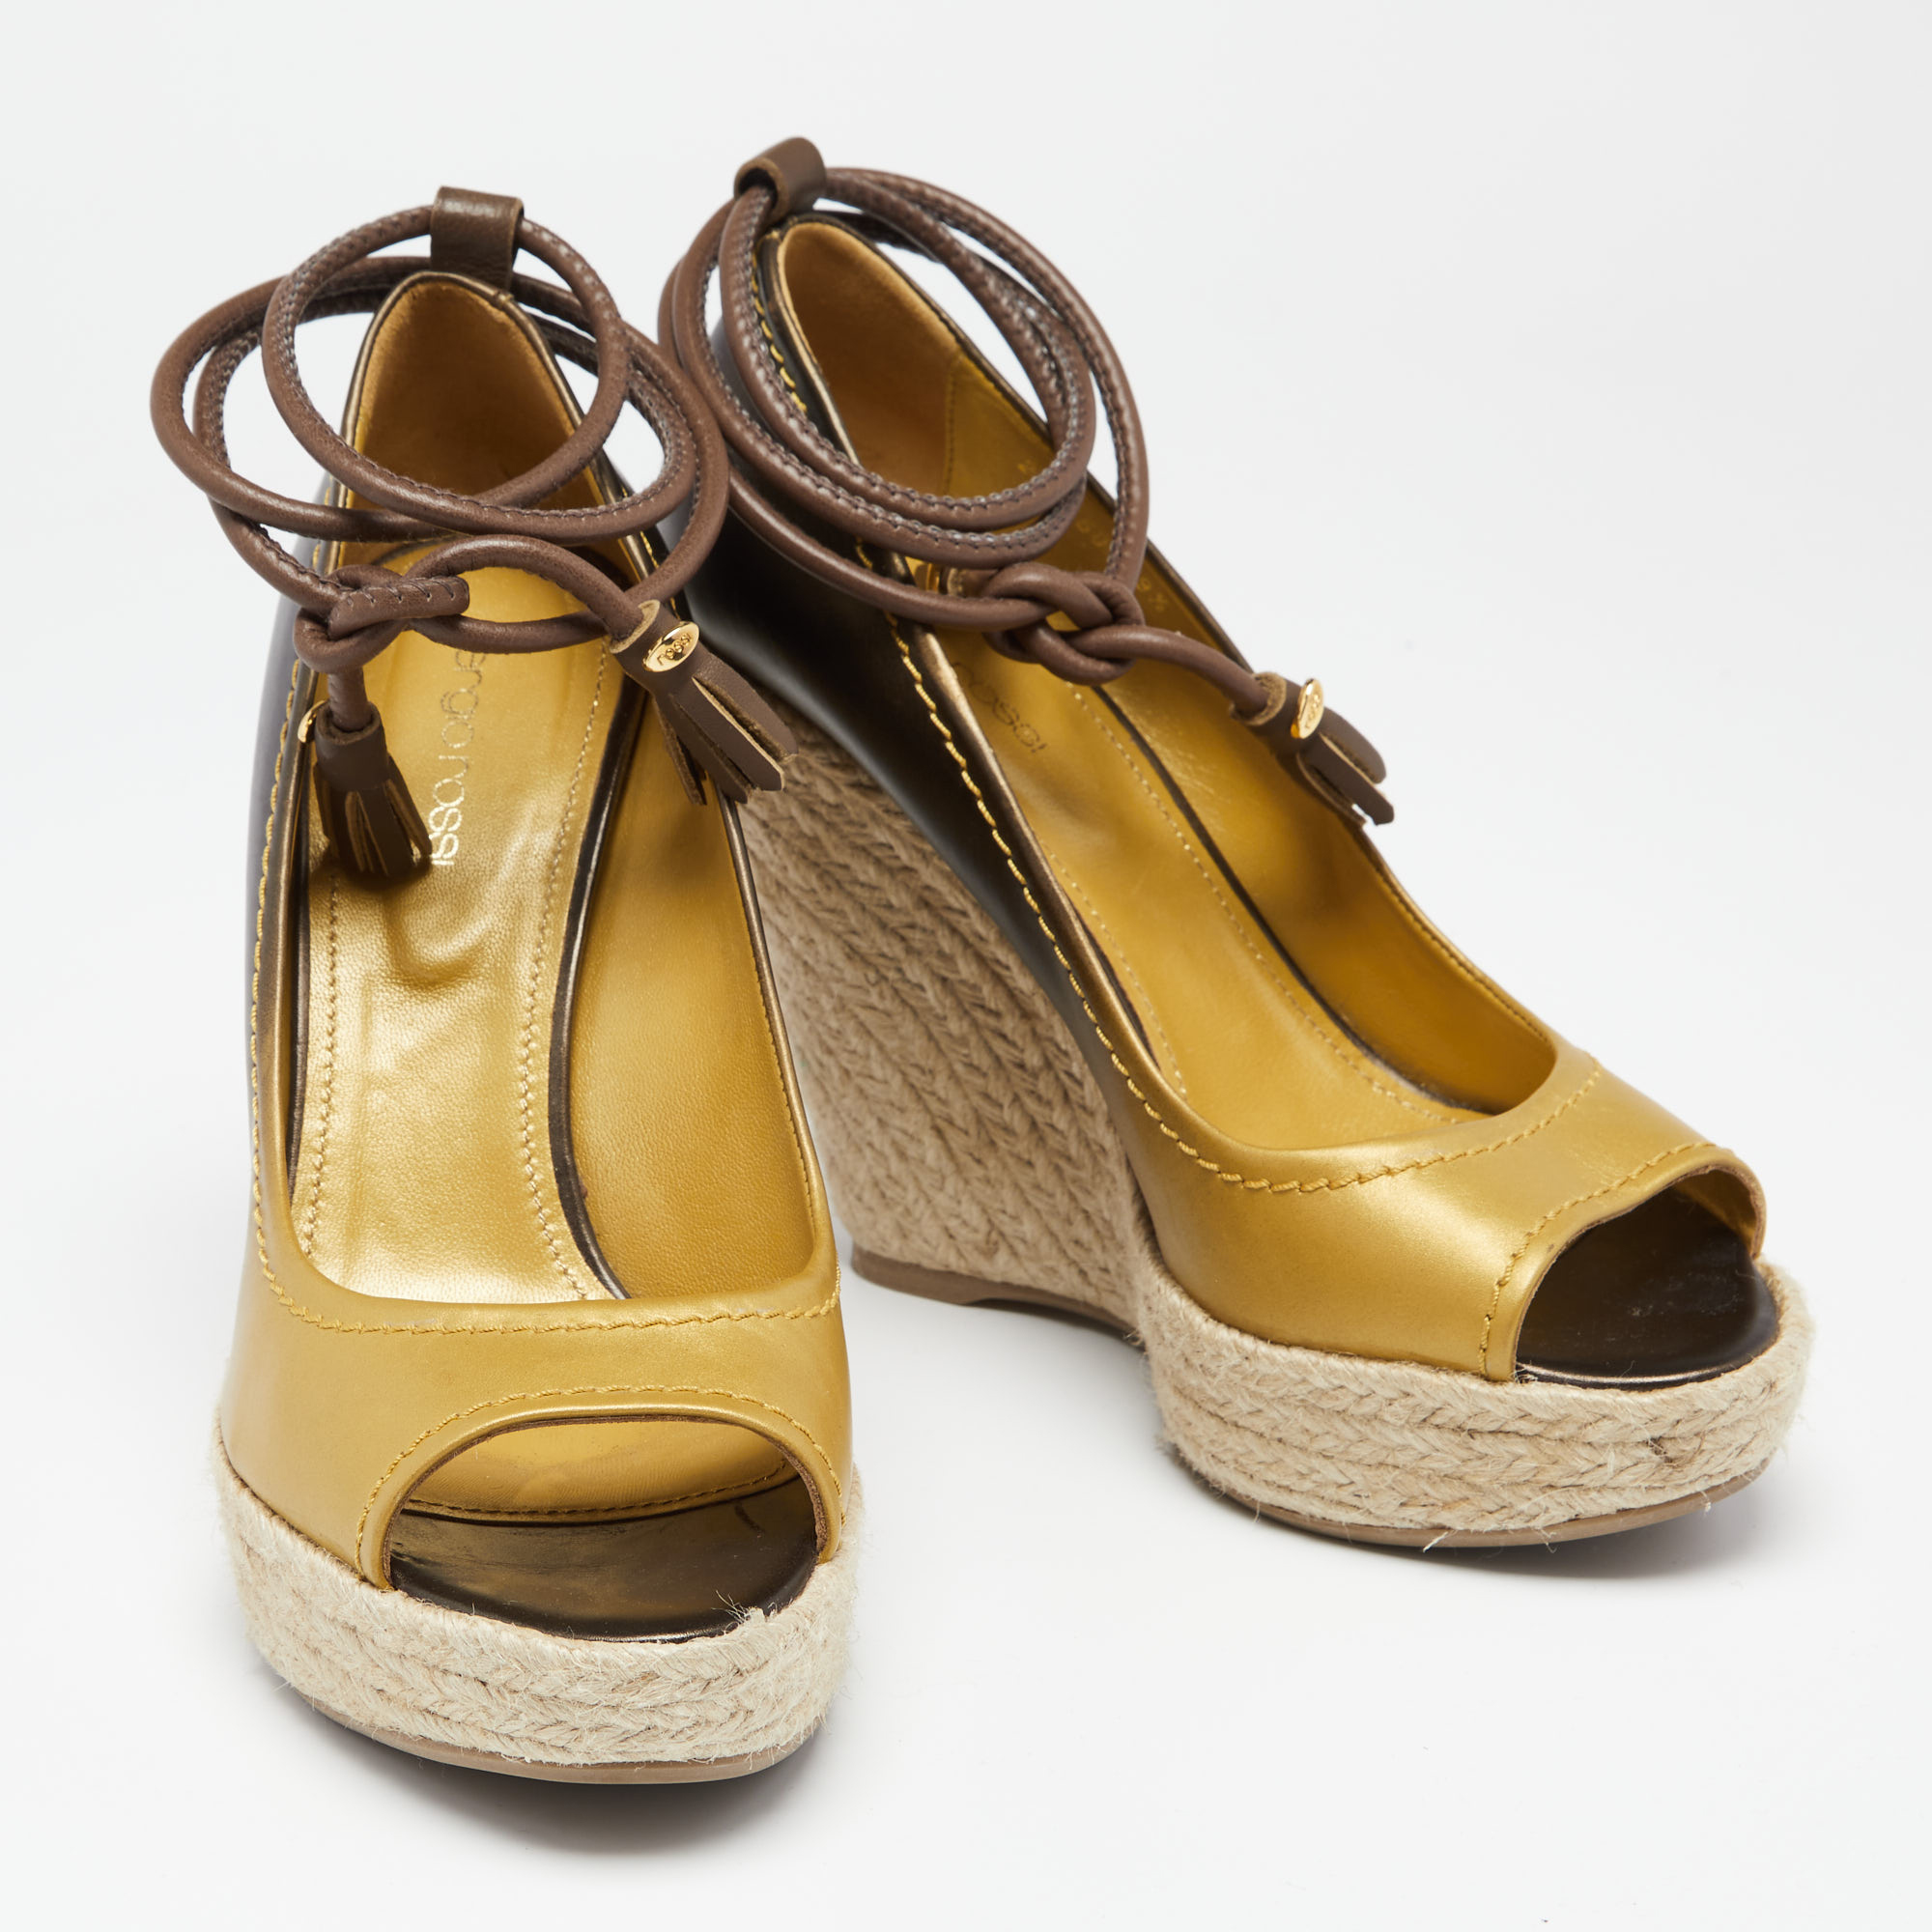 Sergio Rossi Ombre Gold Leather And Jute Ankle Wrap Wedge Pumps Size 39.5